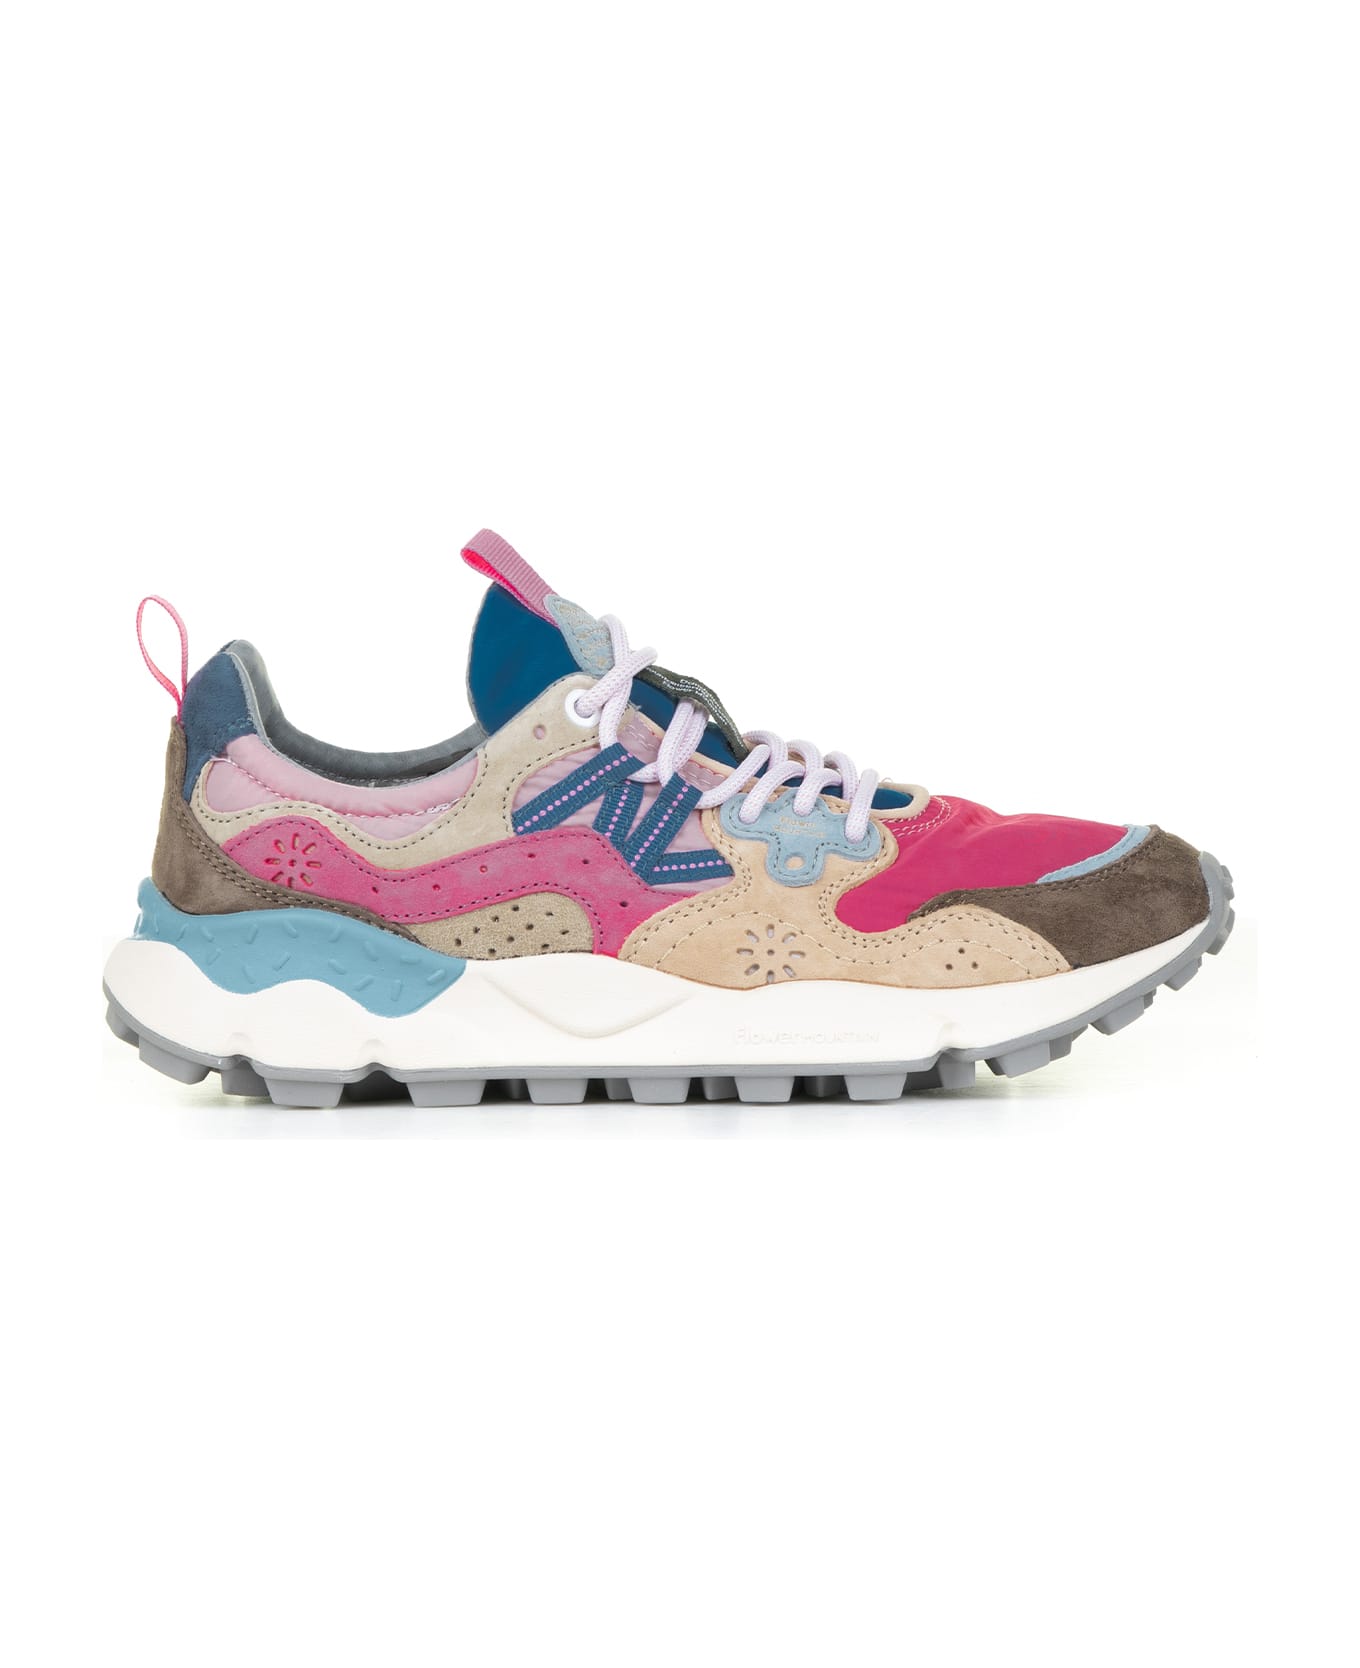 Flower Mountain Multicolored Yamano Sneakers In Suede And Nylon - PINK MULTI スニーカー